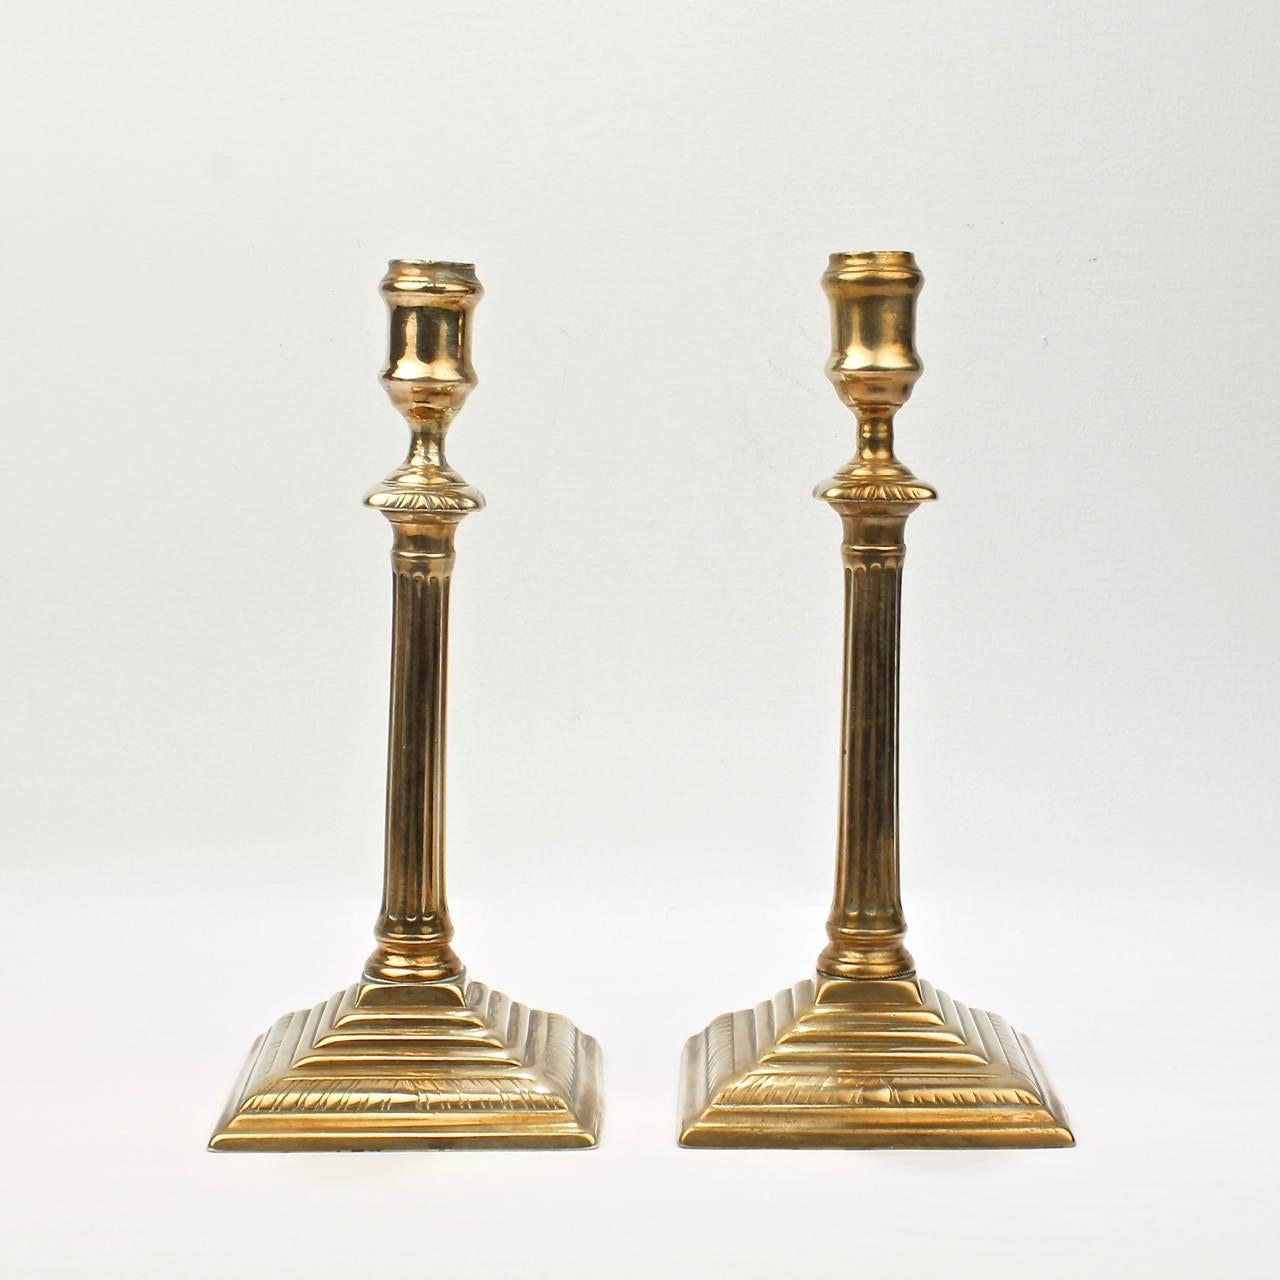 Cast Pair of English Neoclassical George III Brass Candlesticks, 18th Century